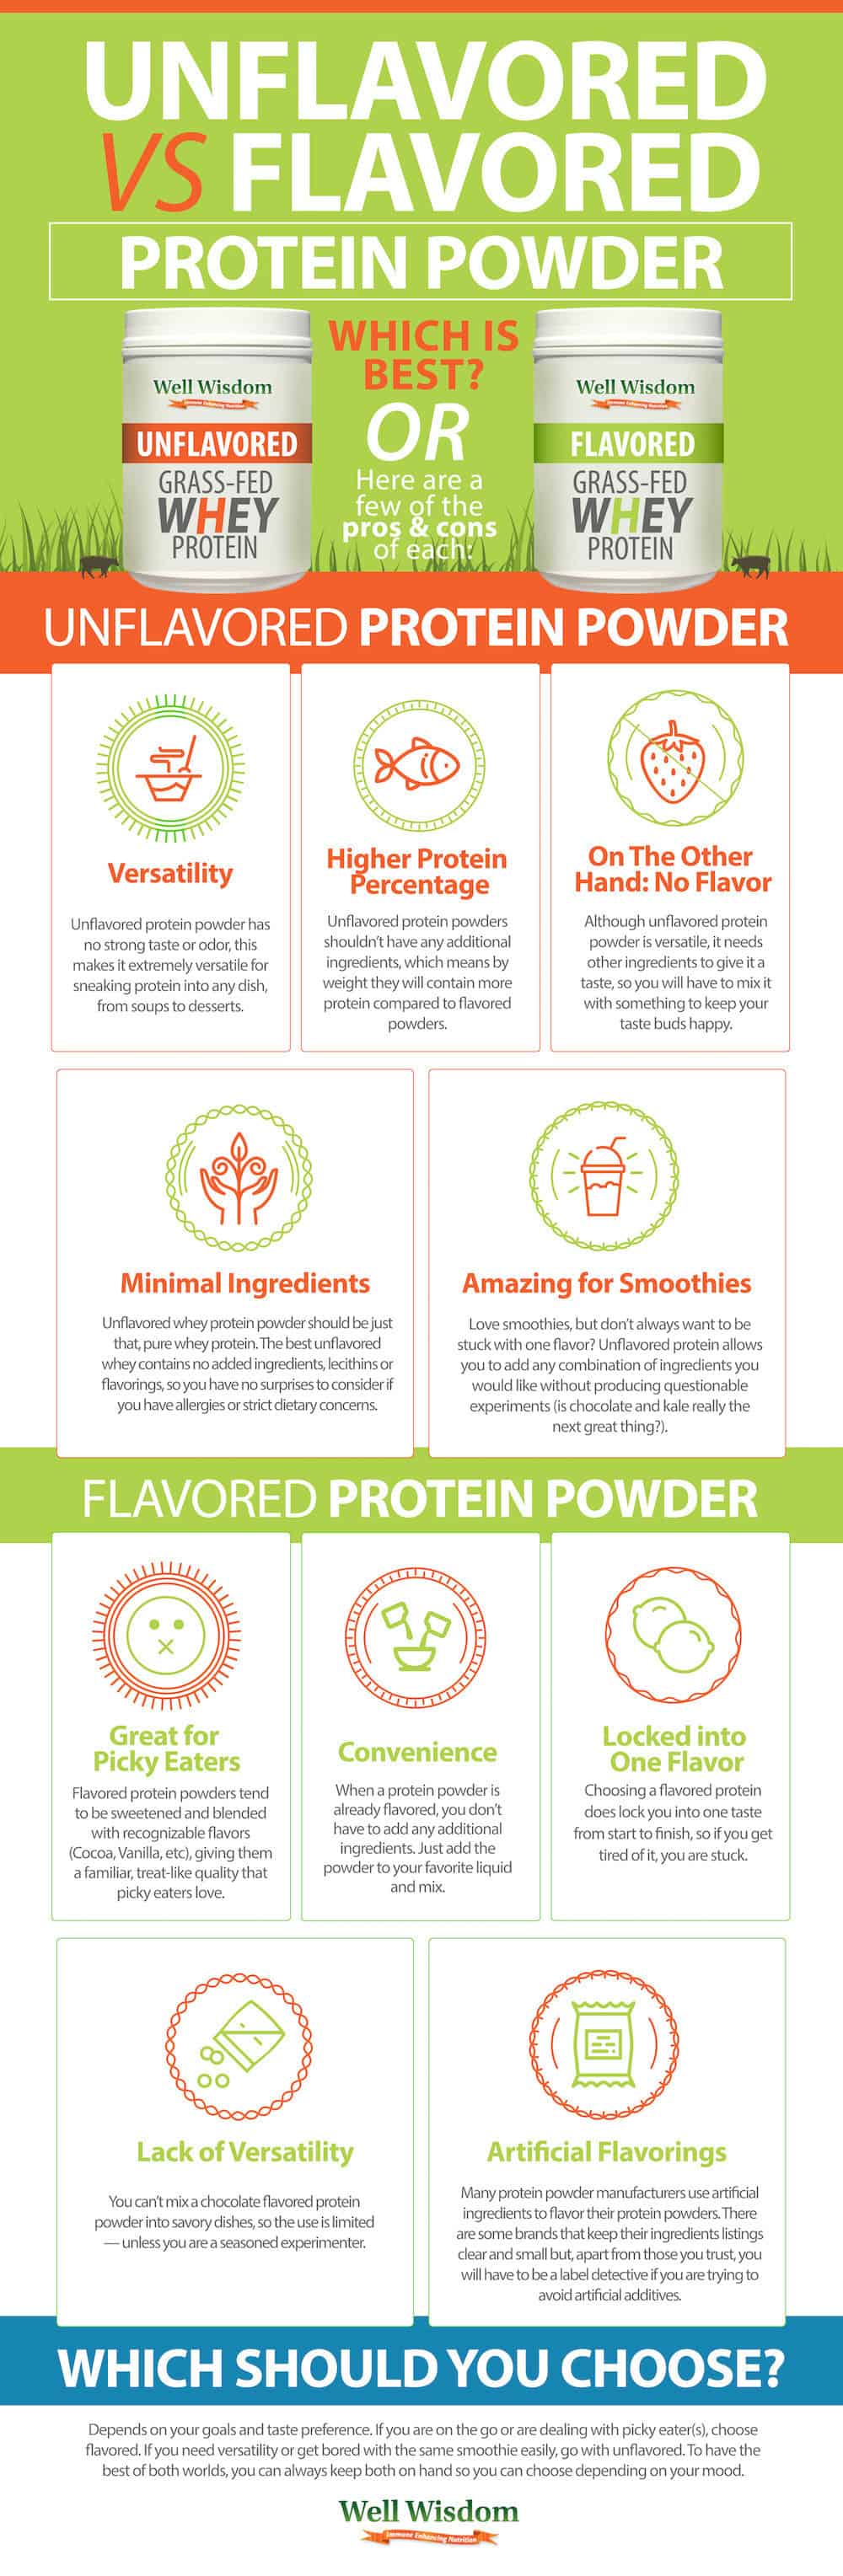 Unflavored vs Flavored Protein Powder